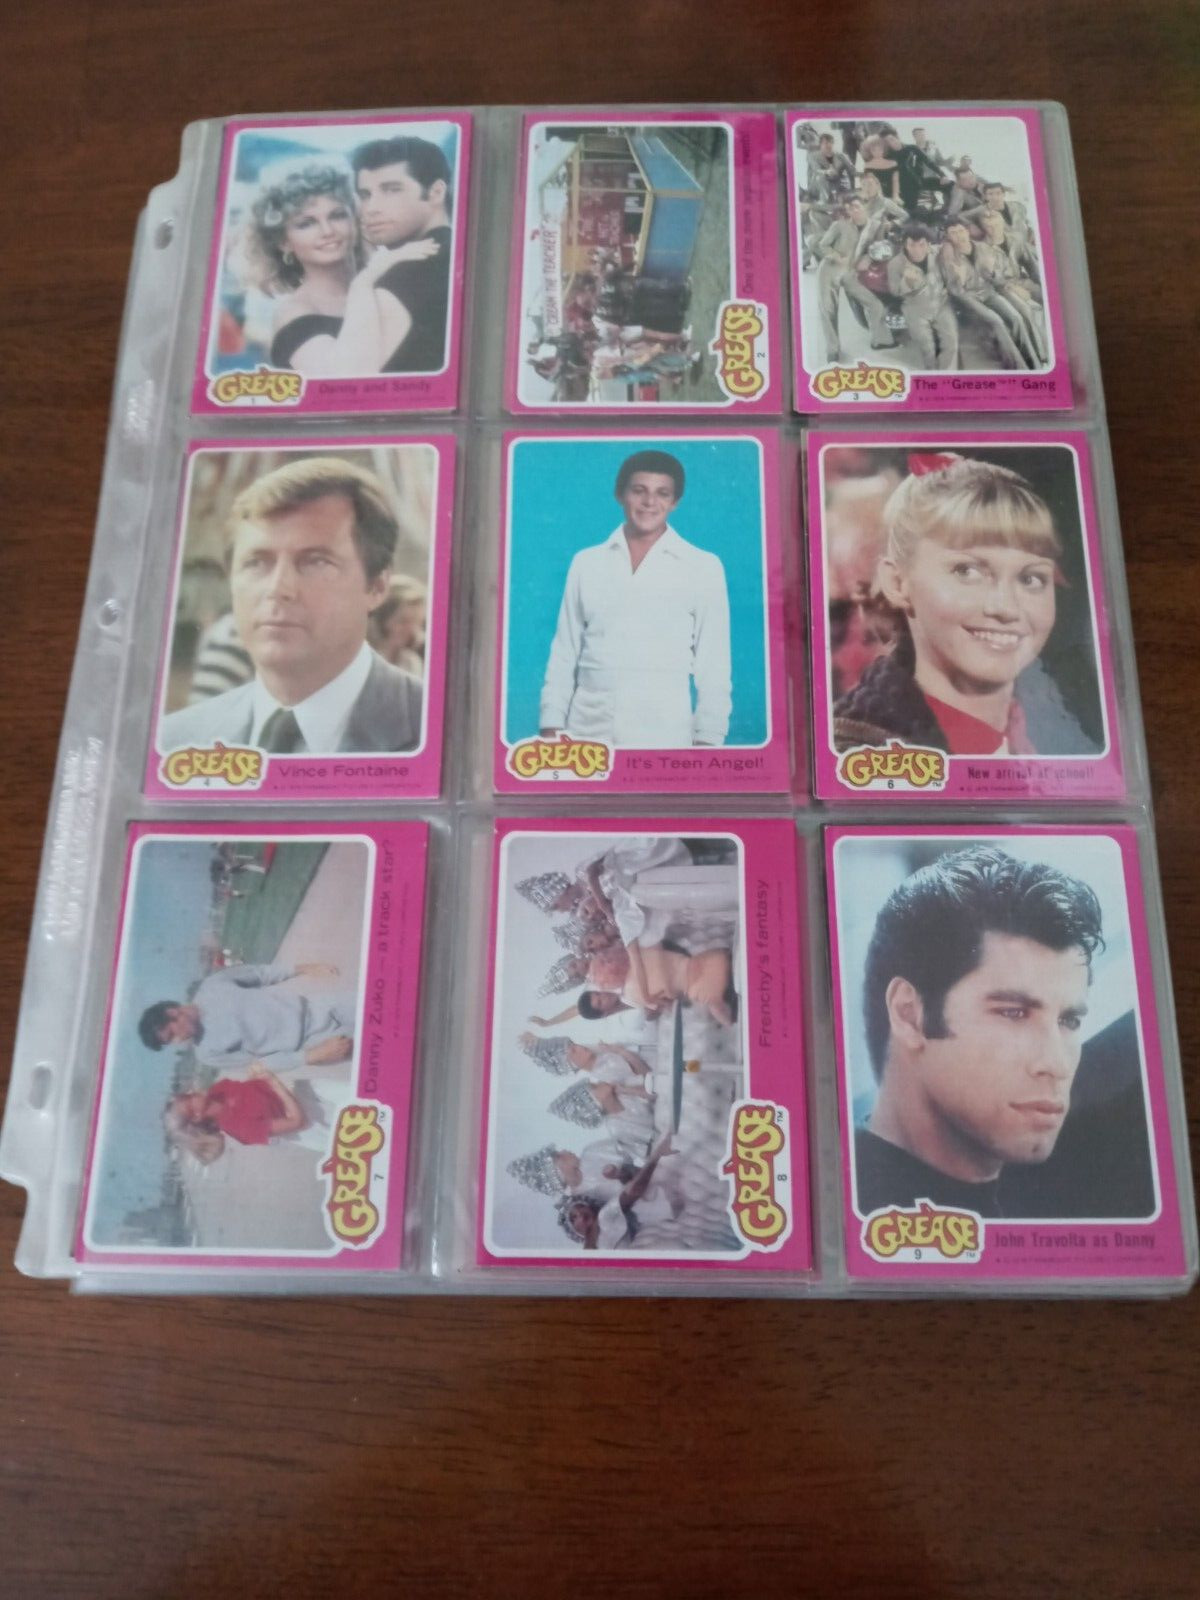 Grease Trading Cards - 1978 - 10 covered sheets - 4 different series